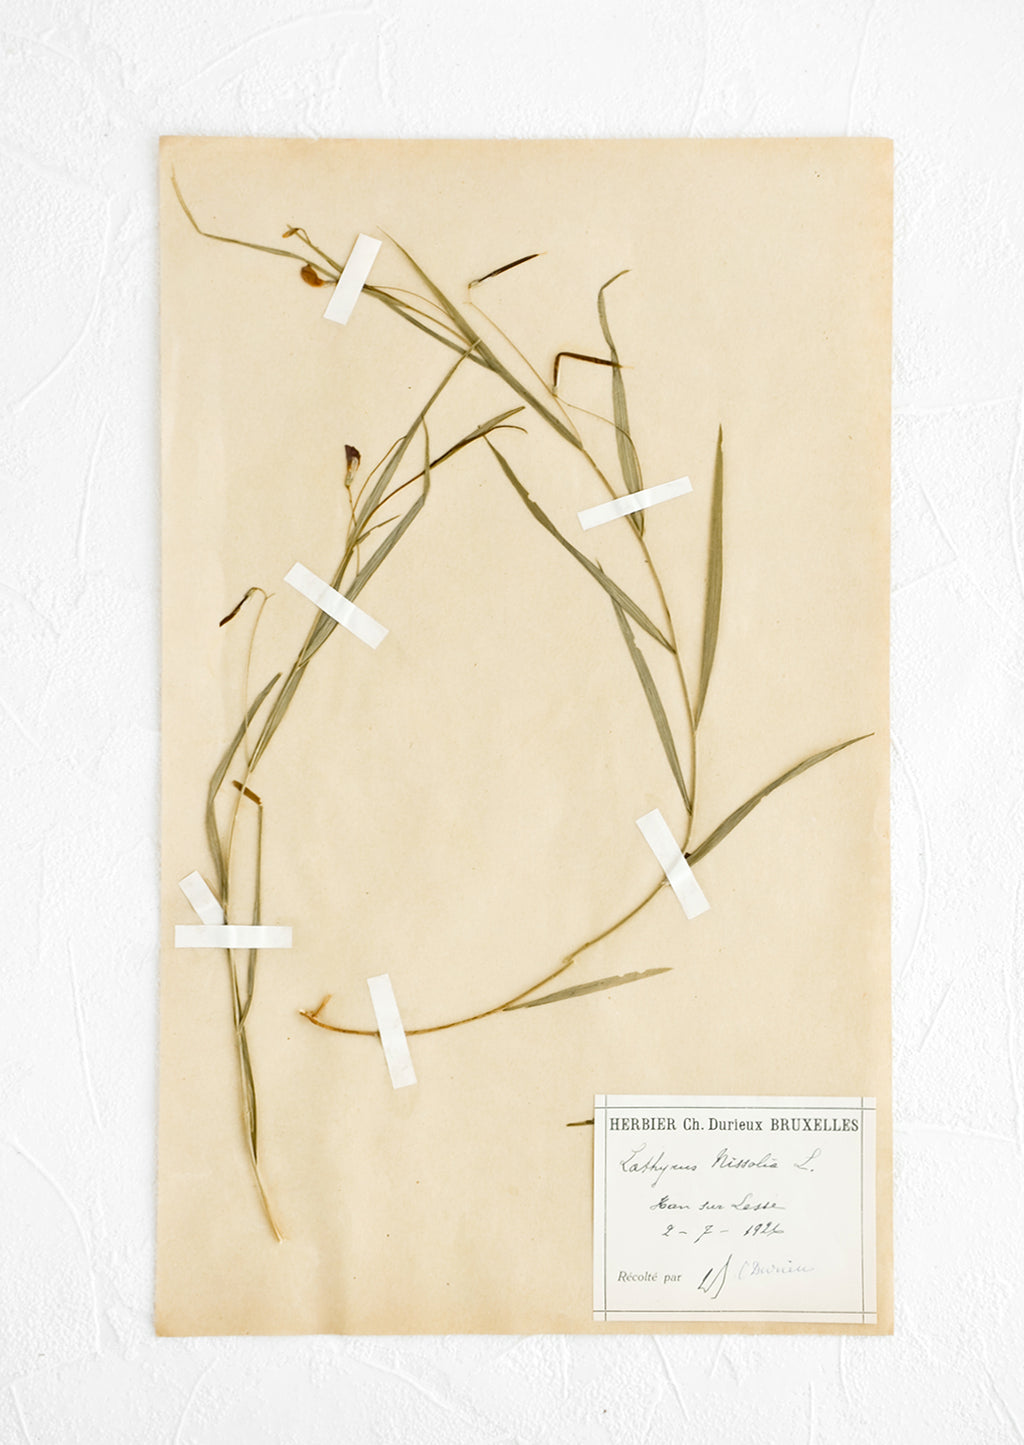 1: One hundred year old dried floral specimen (grass pea) on paper, used as artwork